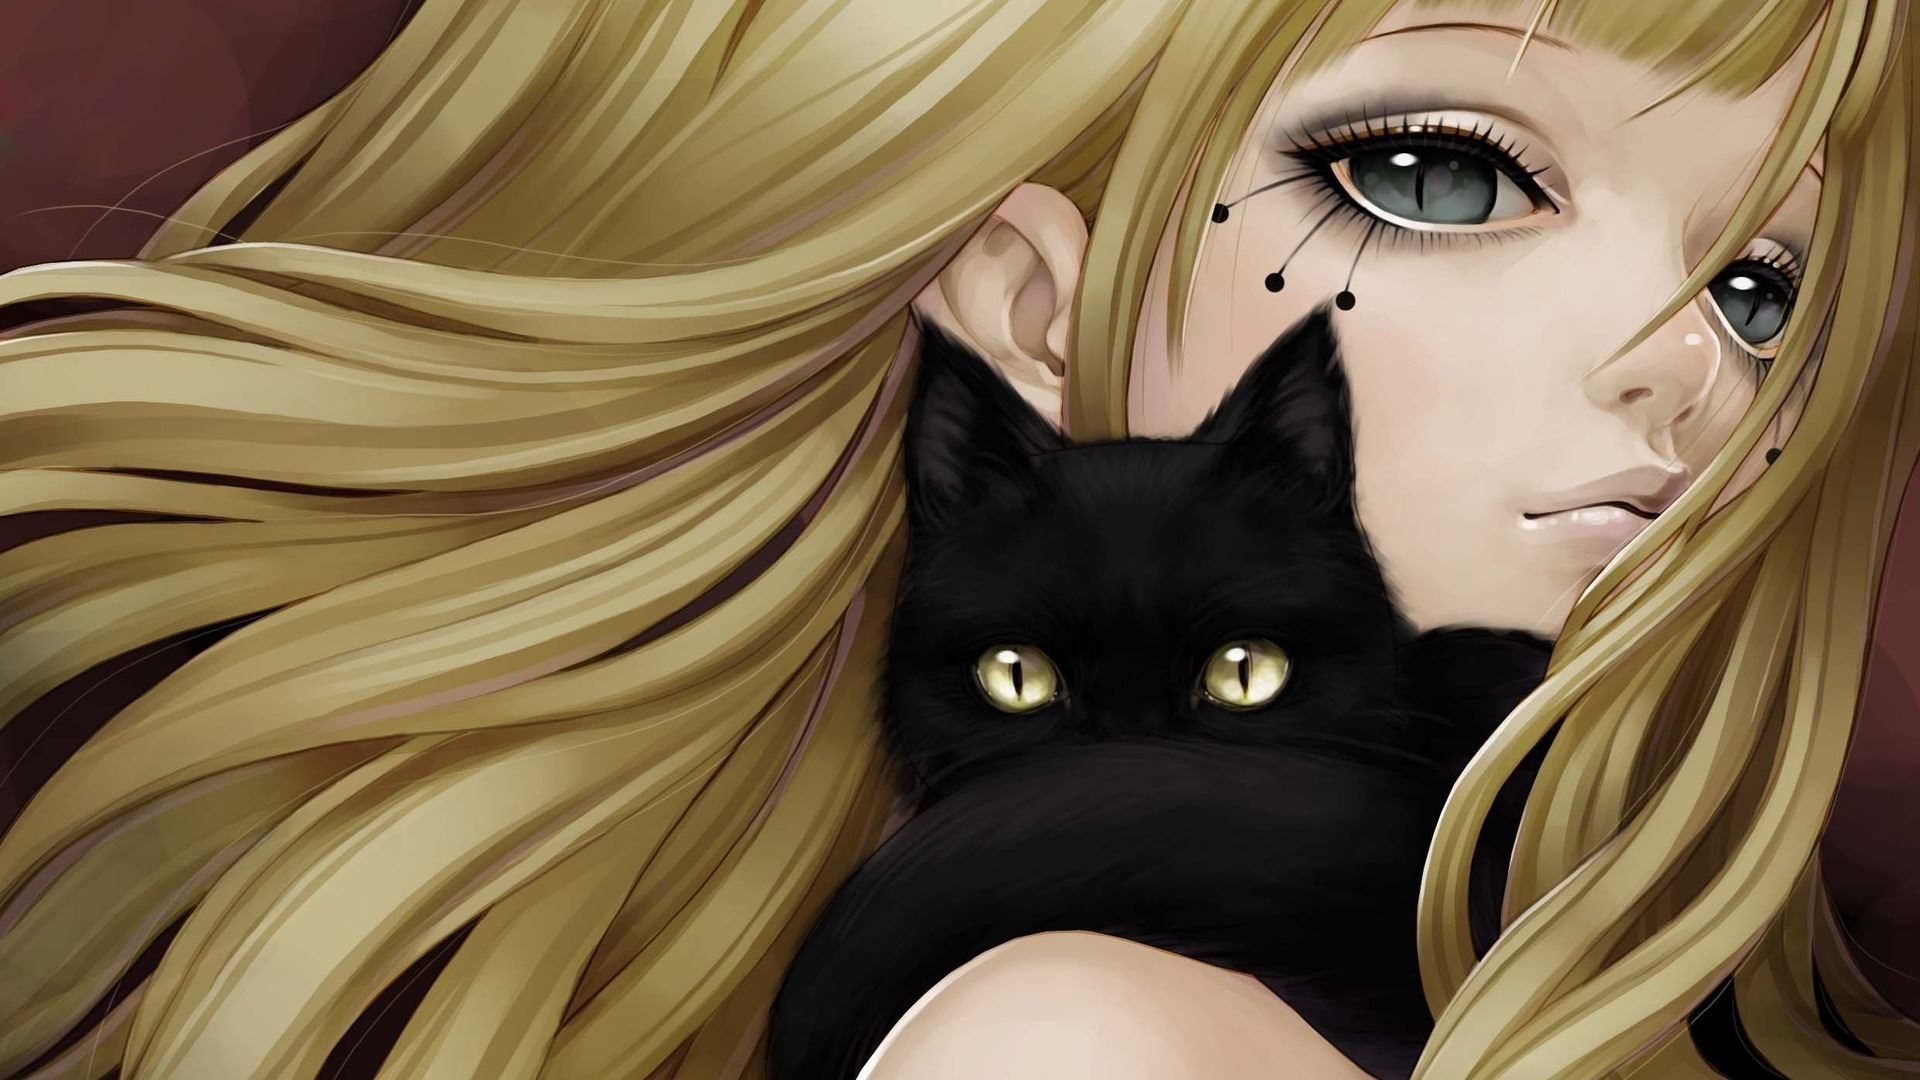 Anime Girl And Black Cat   High Definition Wallpapers   HD wallpapers